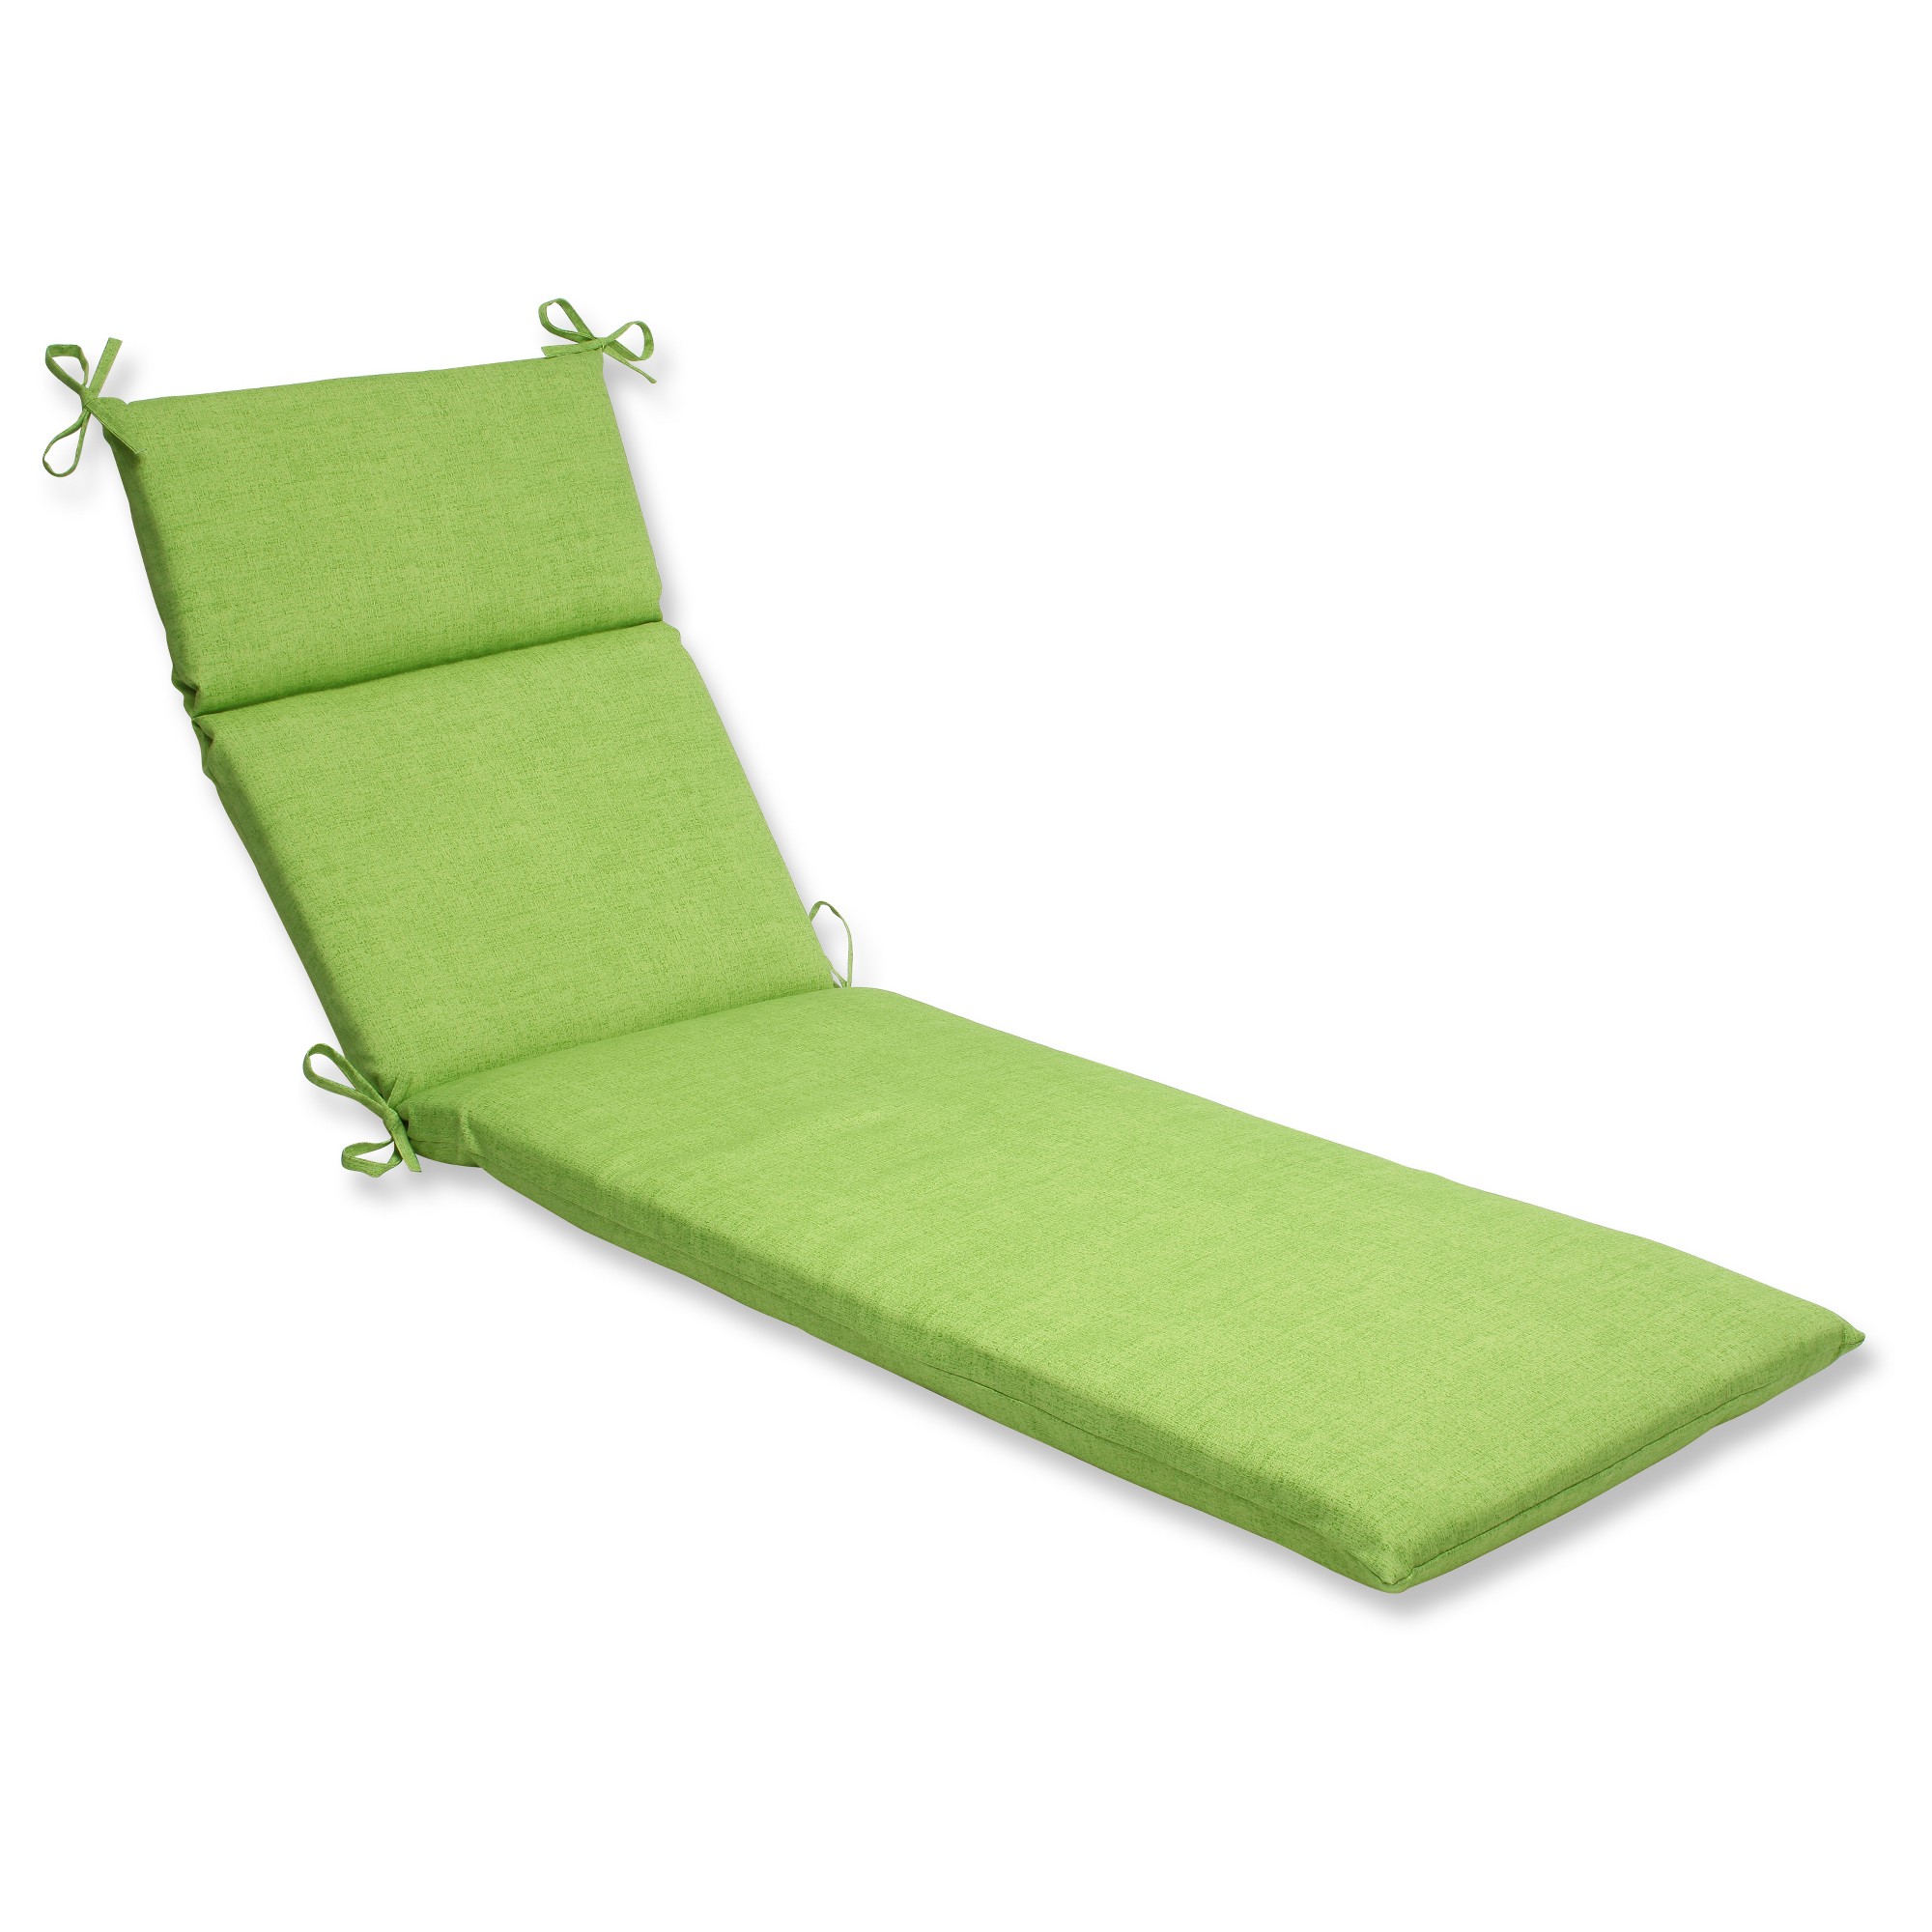 Outdoor Chaise Lounge Cushion - Green